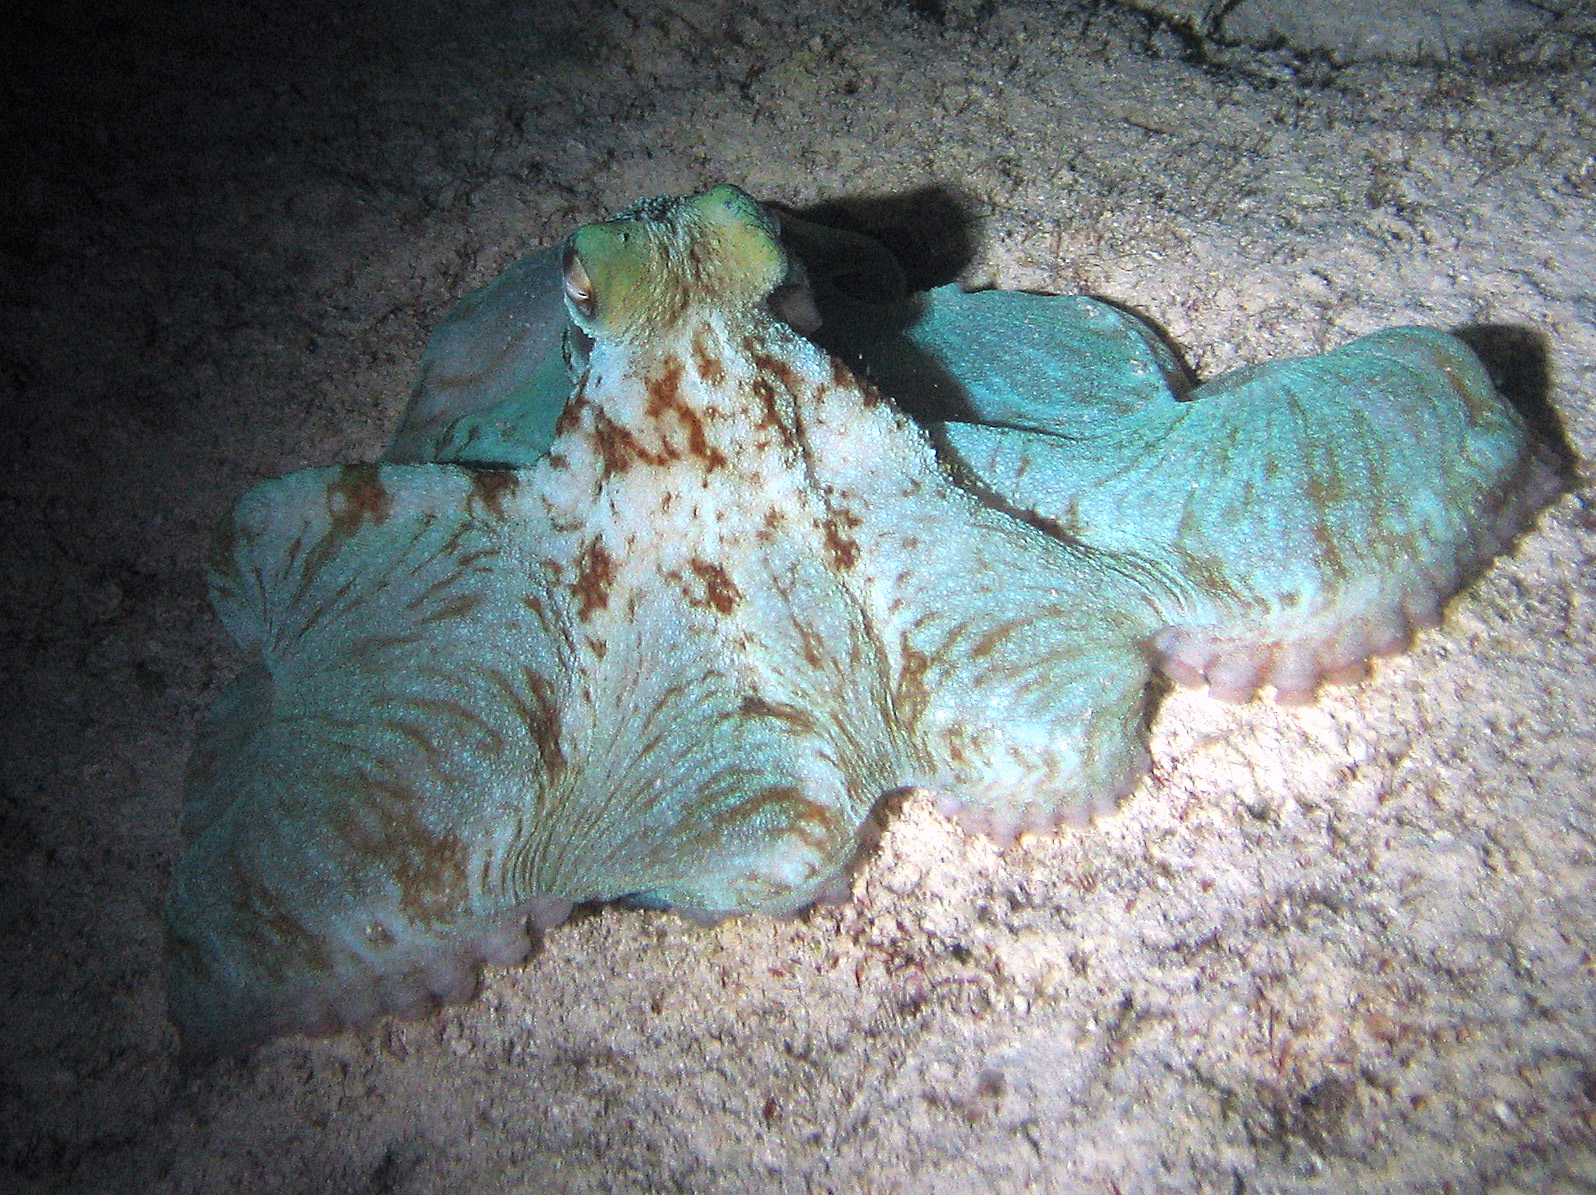 Octopus during night dive